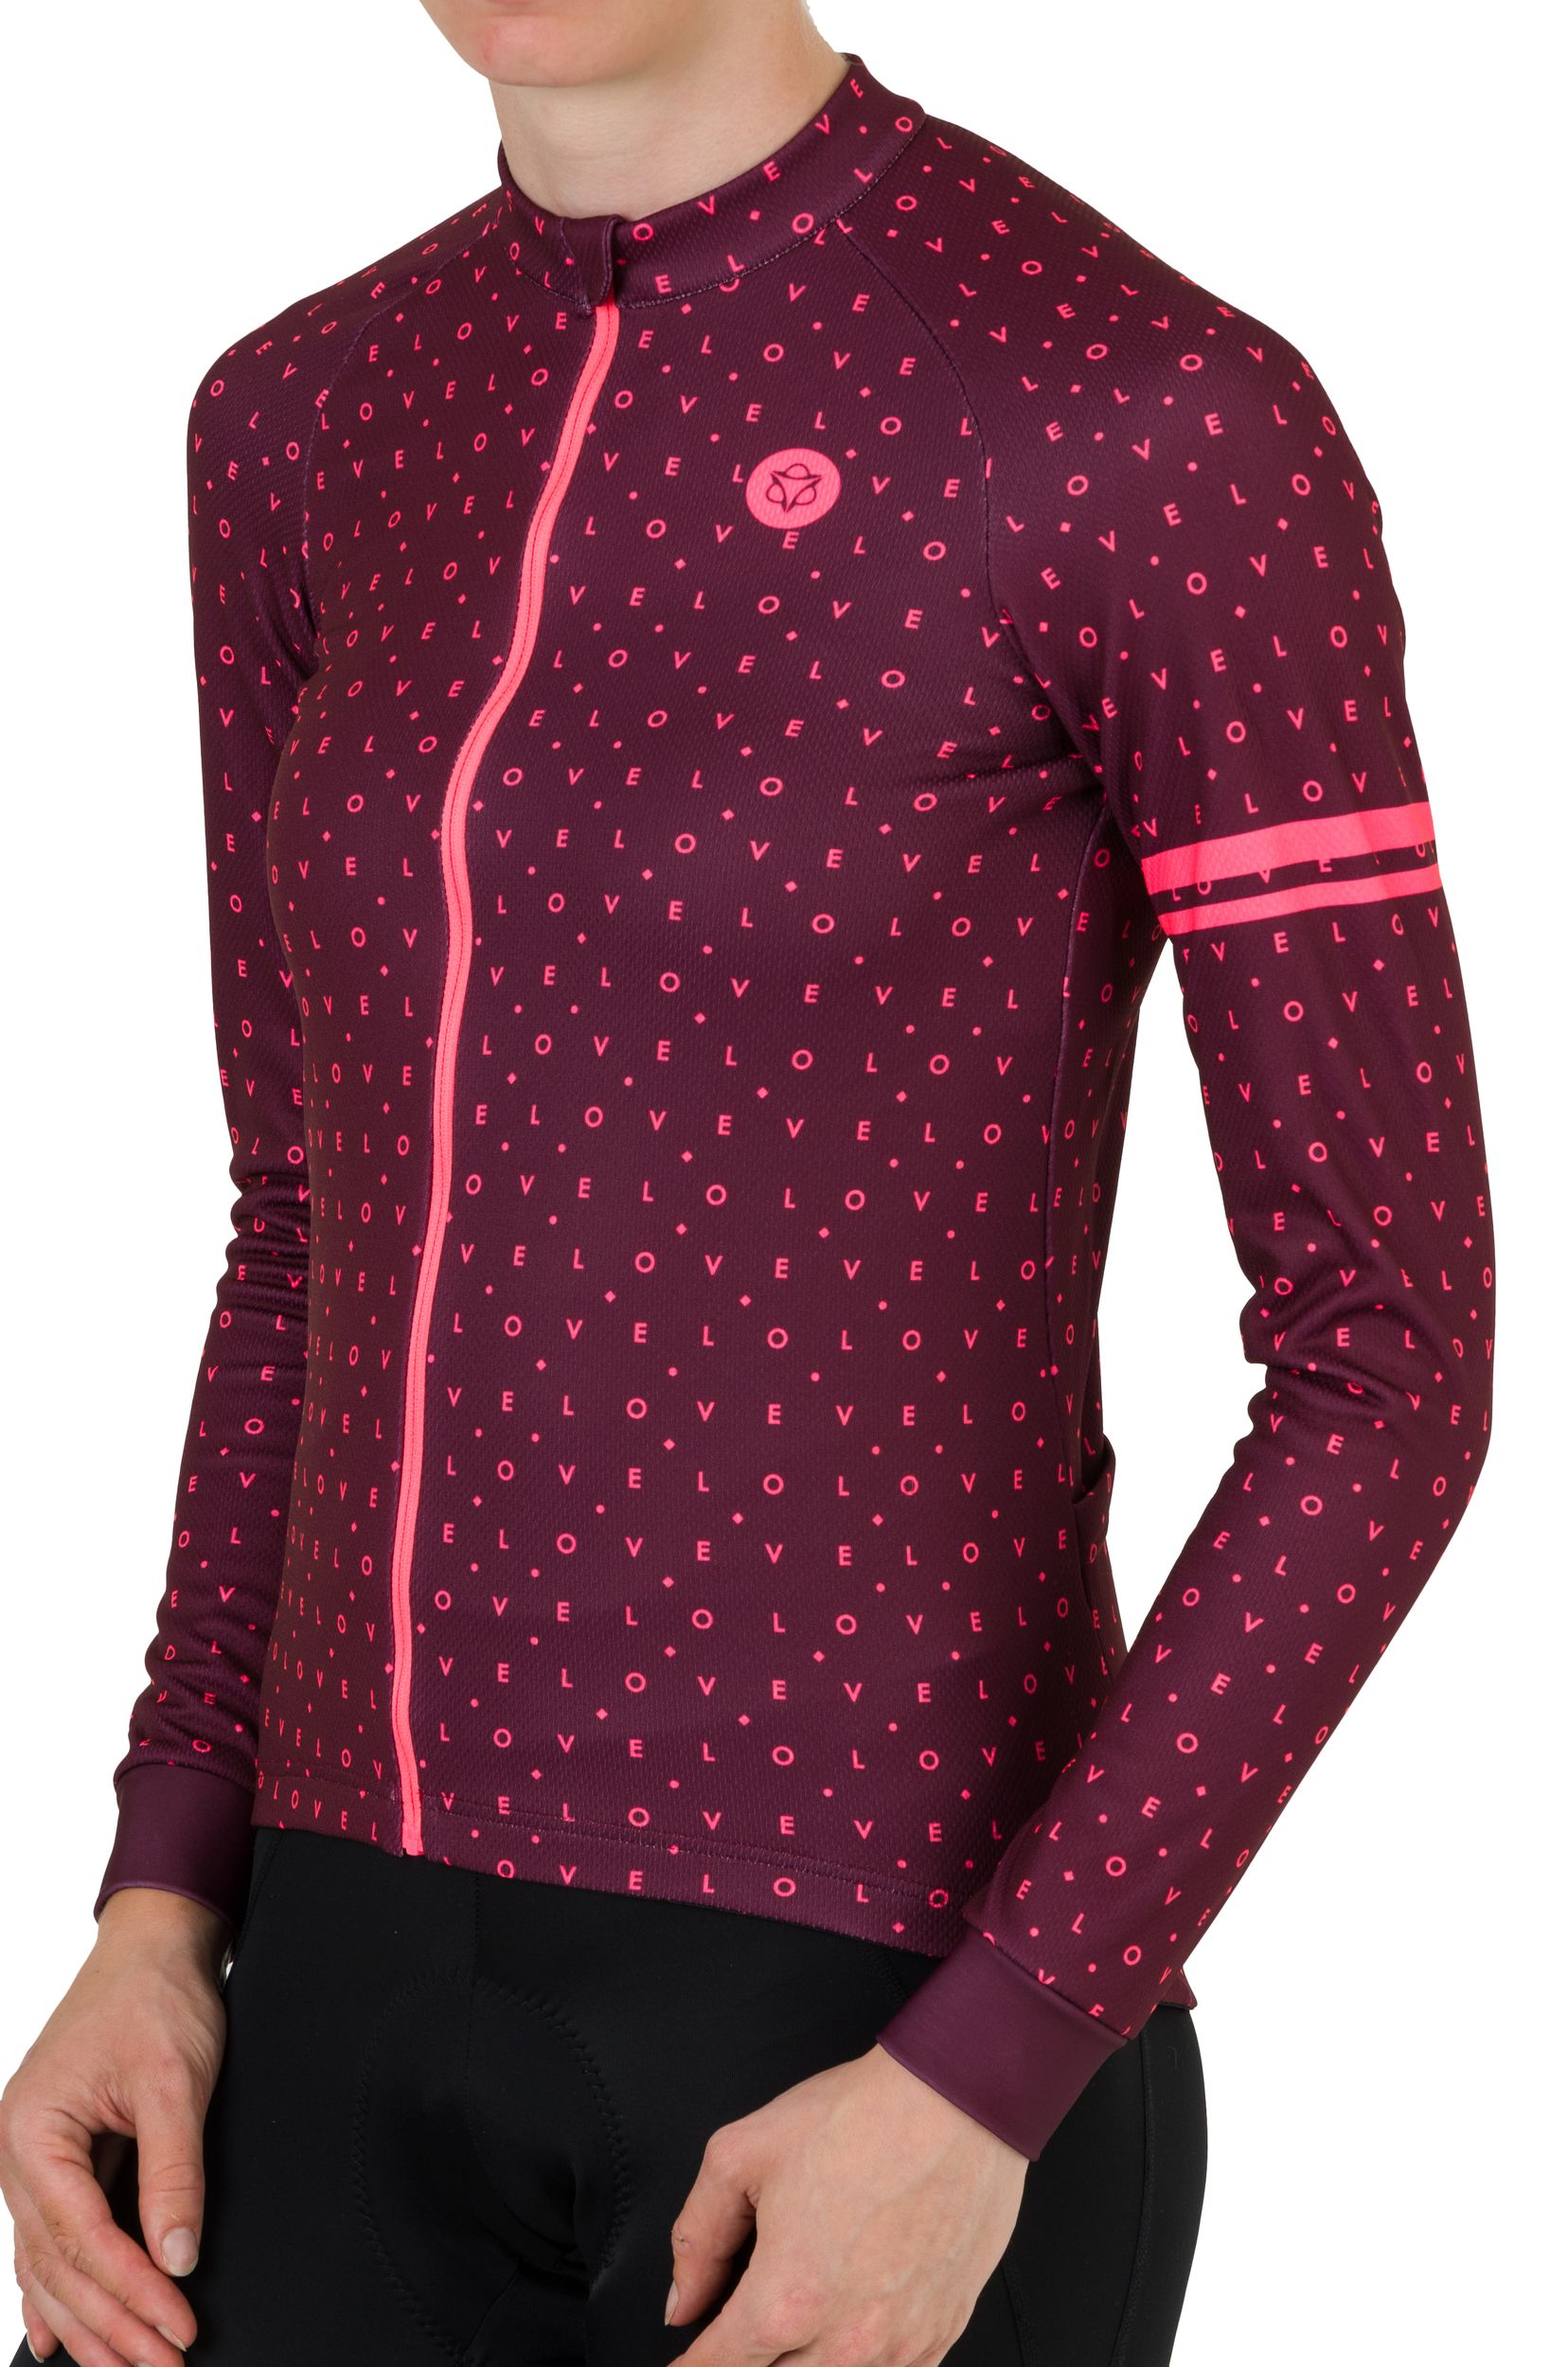 Velo Love Maillot M/L Essential Mujeres fit example